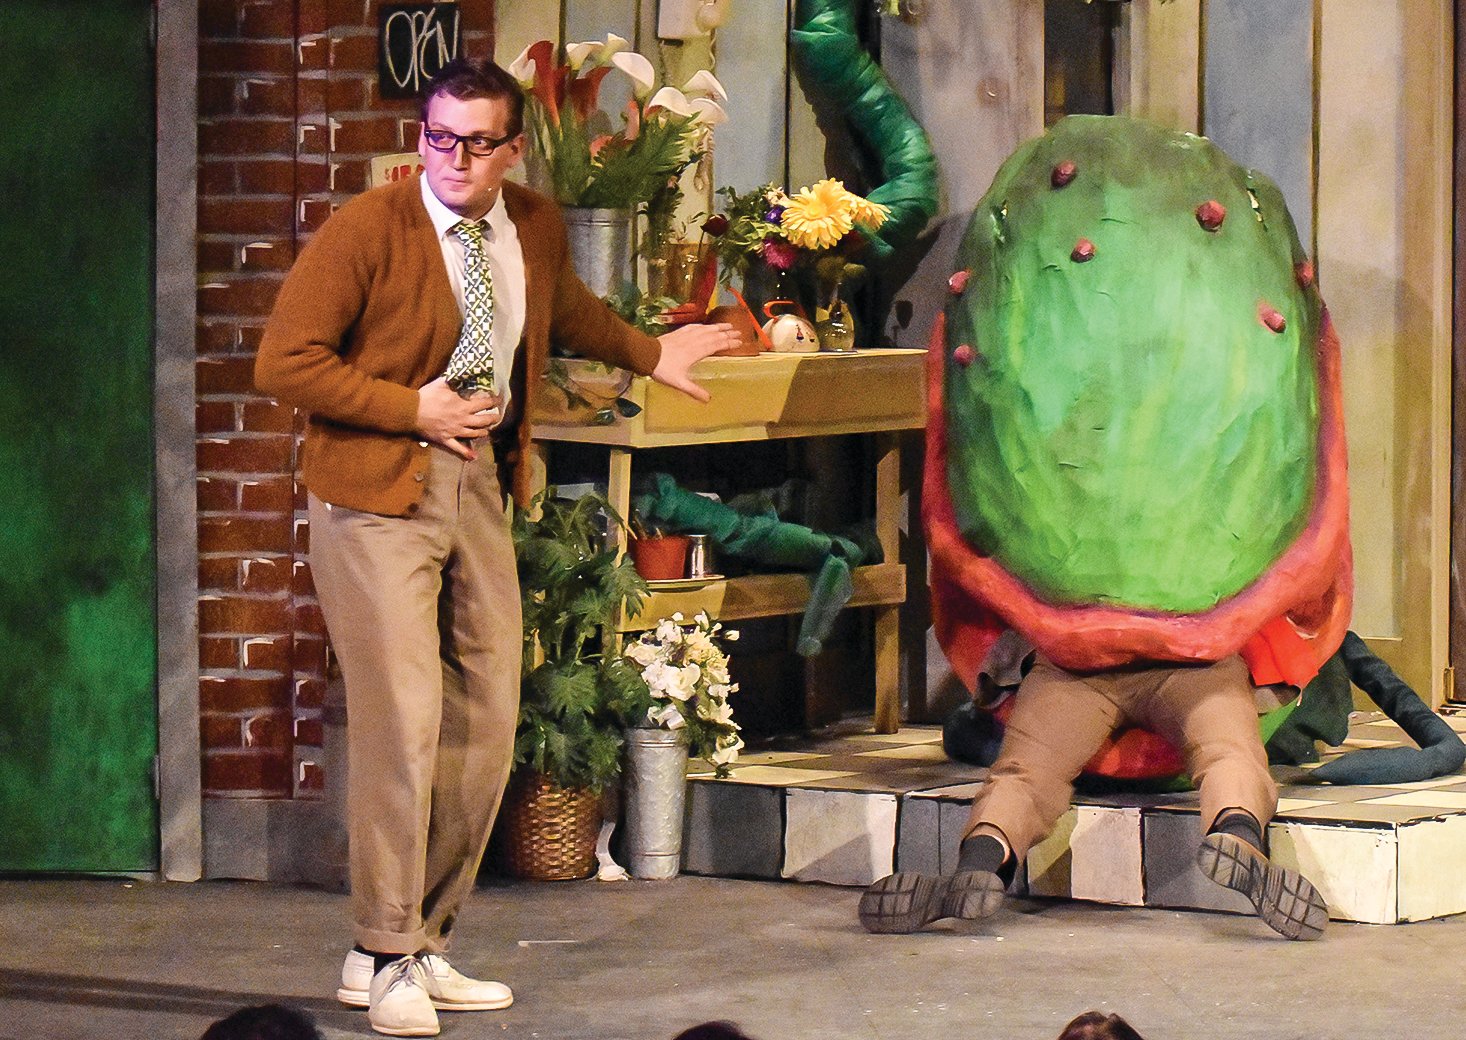 Ian Lah, in his portrayal of Seymour Krelborn, reacts as he discovers that the carnivorous plant, Audrey II, is 
devouring a human victim.